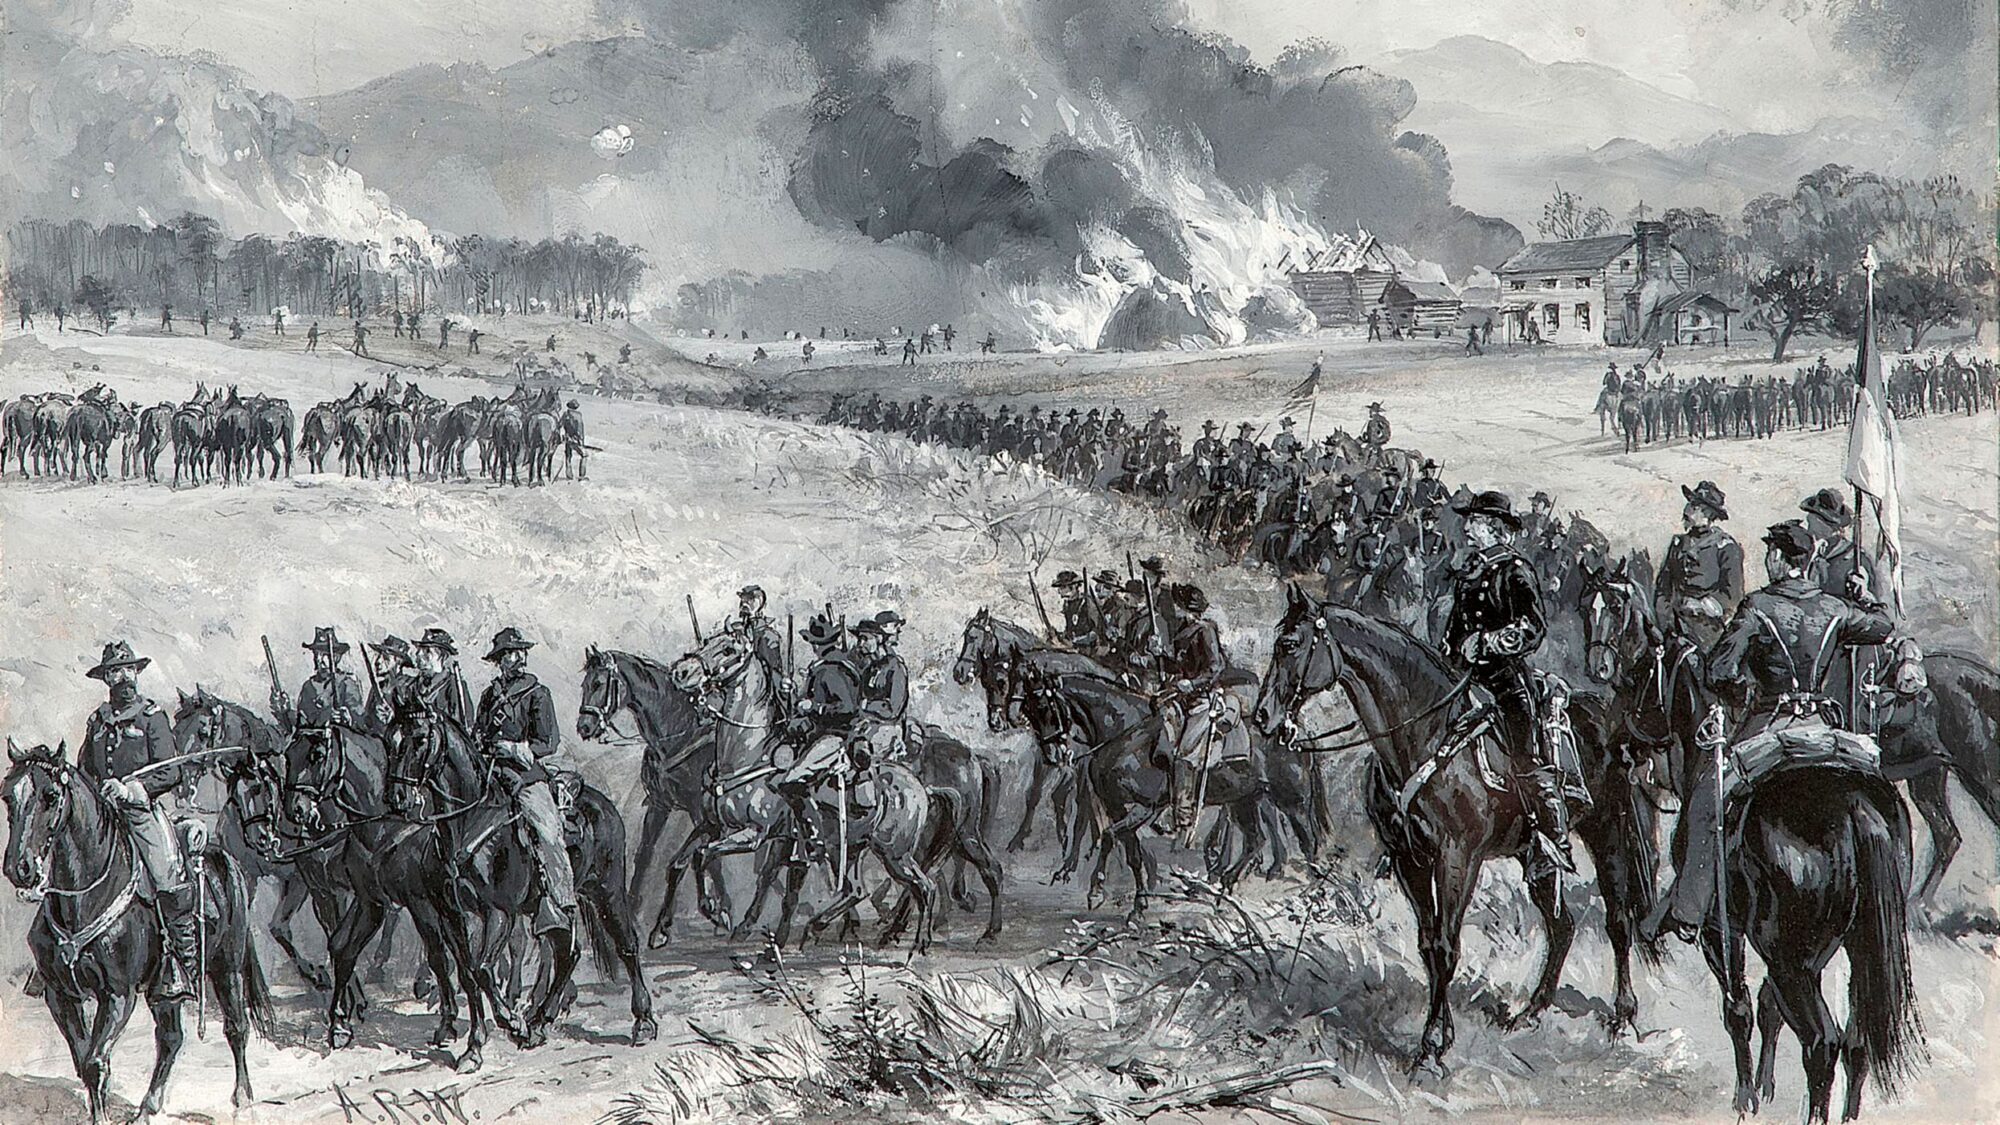 This illustration by Alfred R. Waud shows Custer (with staff at right) and his division burning farms and fields near Mt. Jackson, Virginia, on October 7. Sheridan would report to Grant that day that “I have destroyed over 2,000 barns filled with wheat, hay and farming implements; over 70 mills, filled with flour and wheat; have driven in front of the army over 4,000 head of stock, and have killed and issued to the troops not less than 3,000 sheep.”